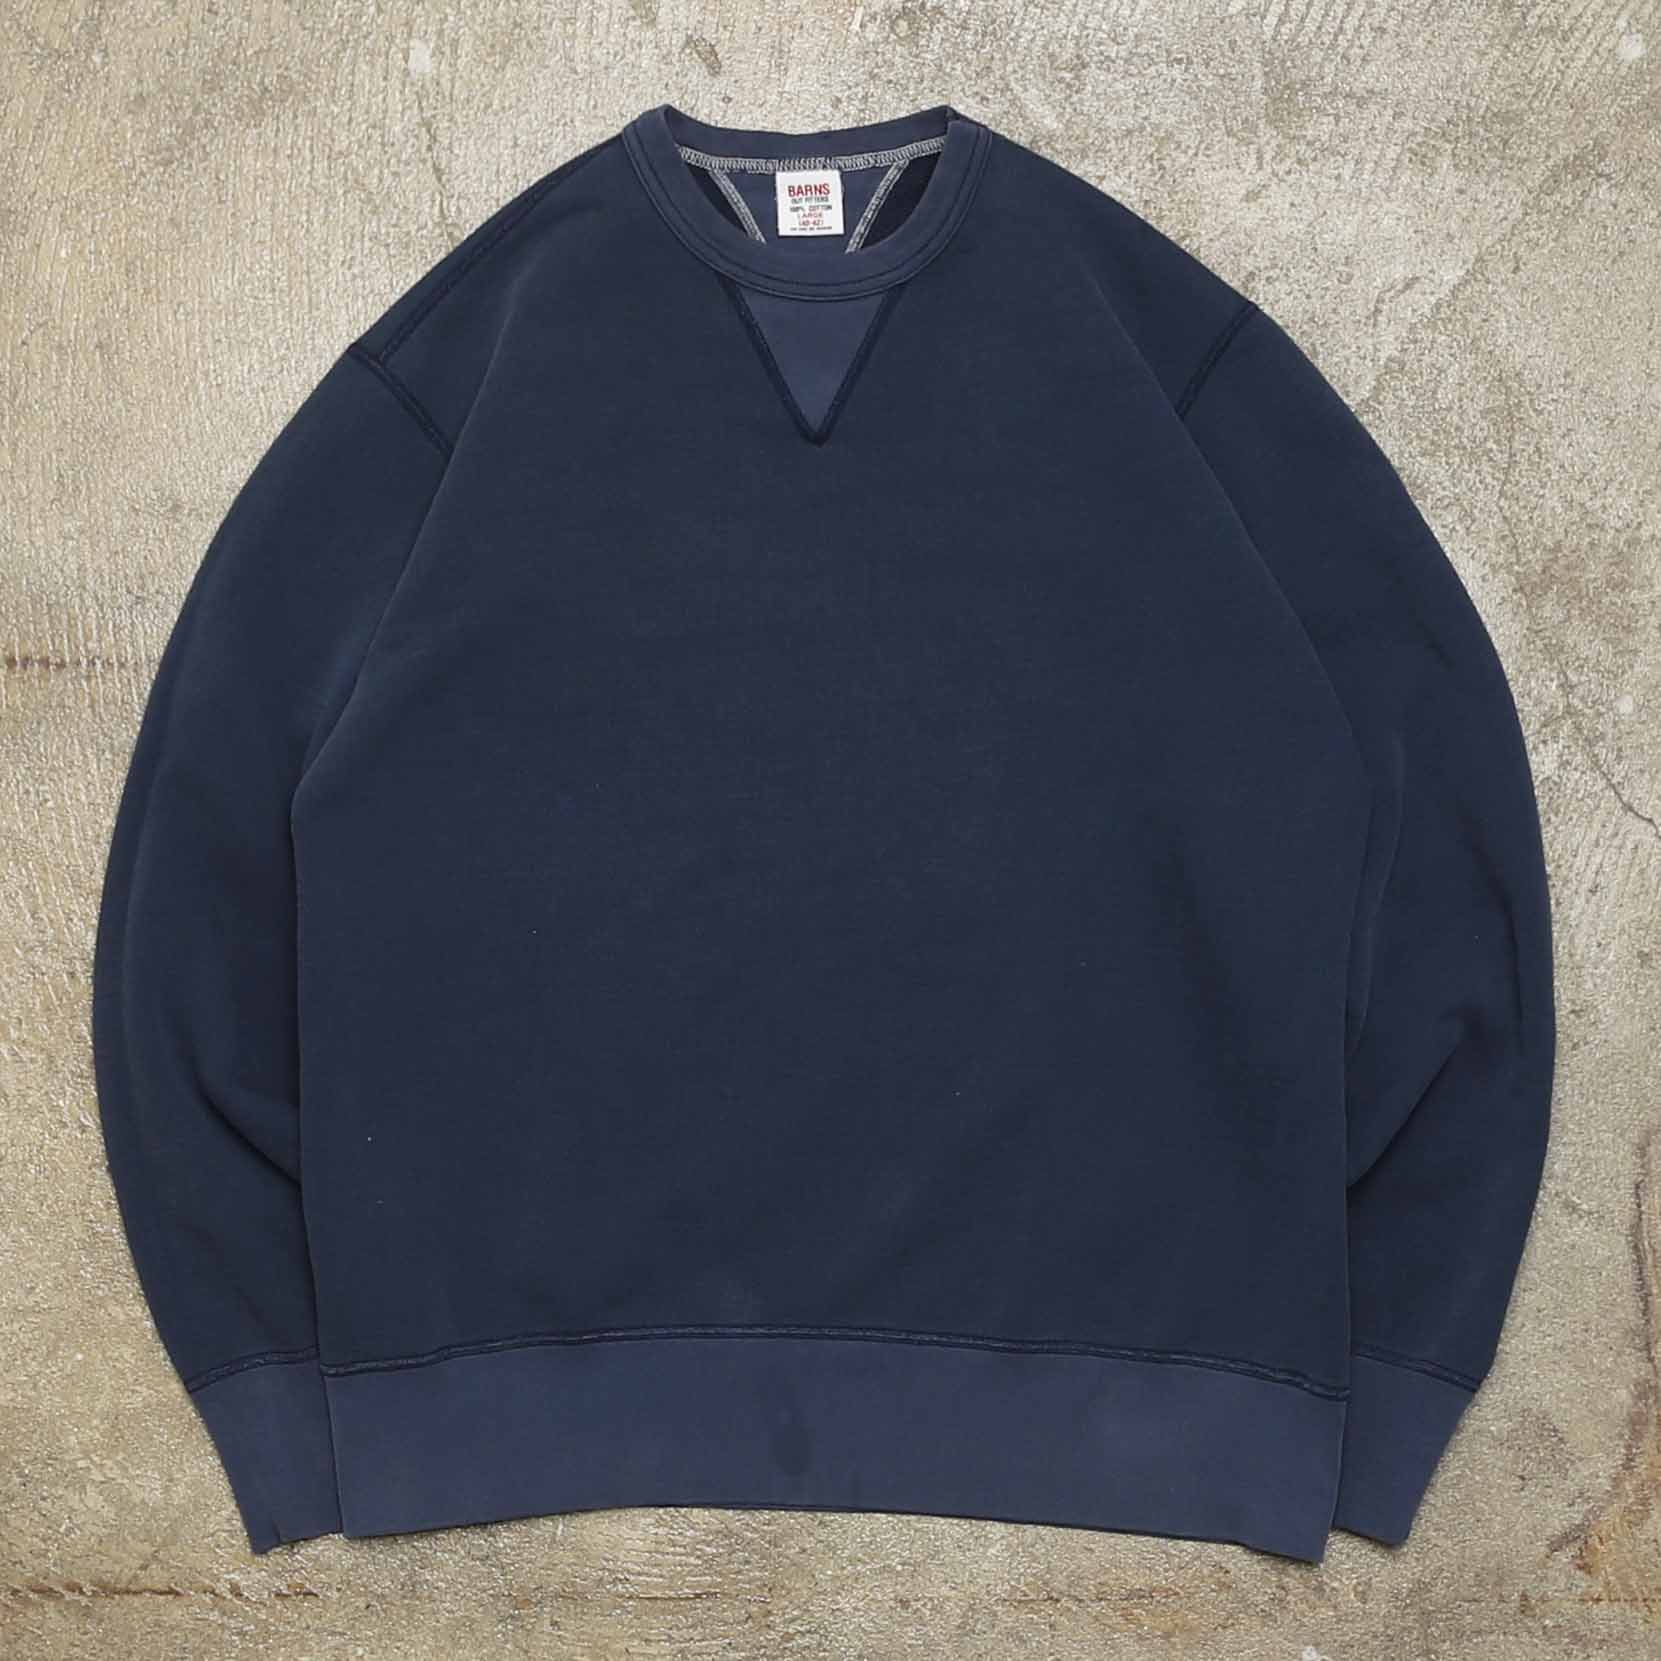 BARNS OUTFITTERS GUSSET CREW SWEATSHIRTS - NAVY